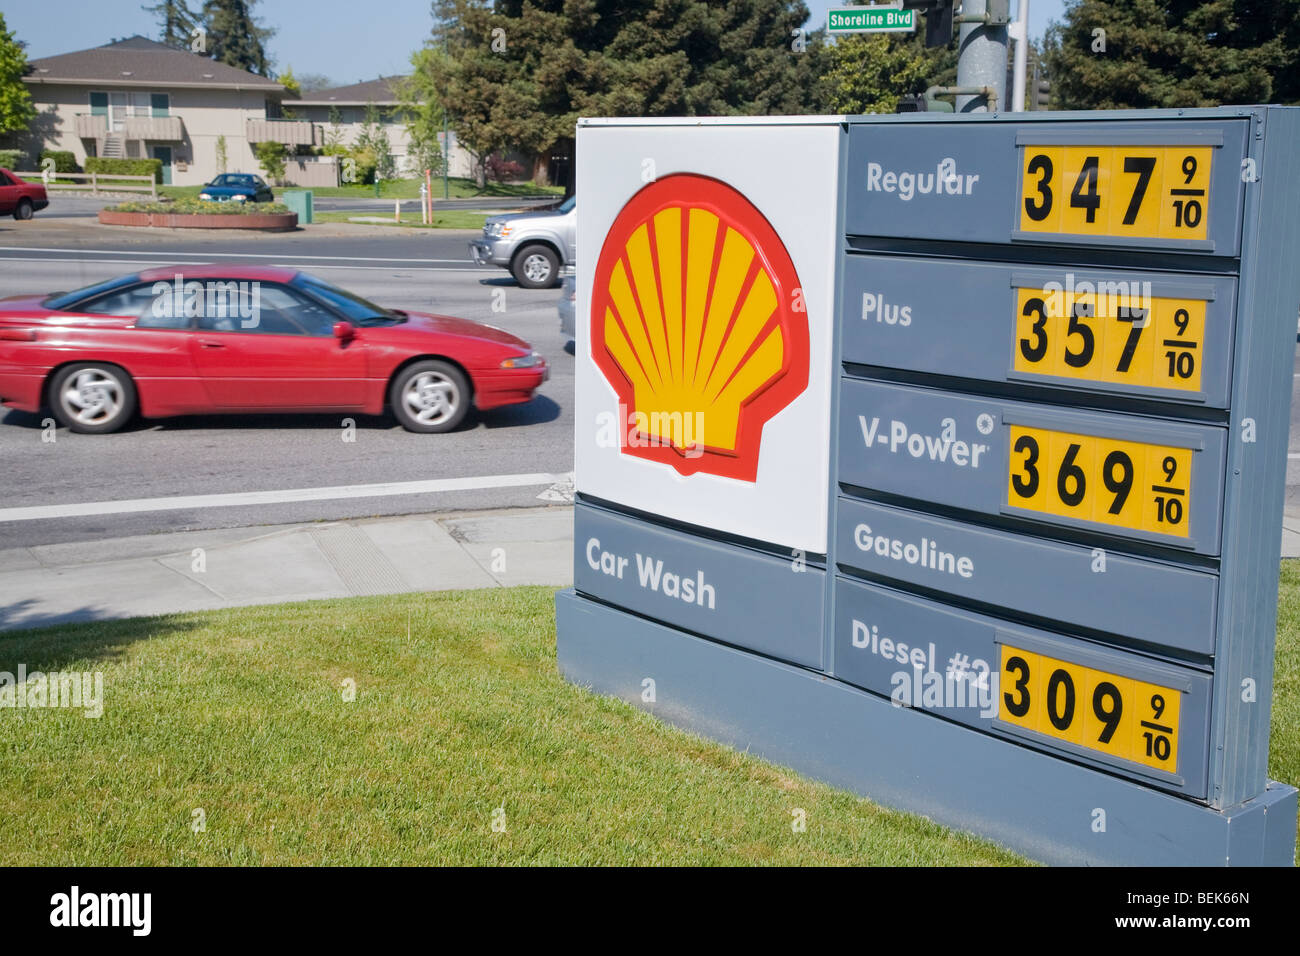 A red car passing a Shell gas price list. on April 24, 2007. Prices way over three dollars a gallon. Mountain View, California Stock Photo